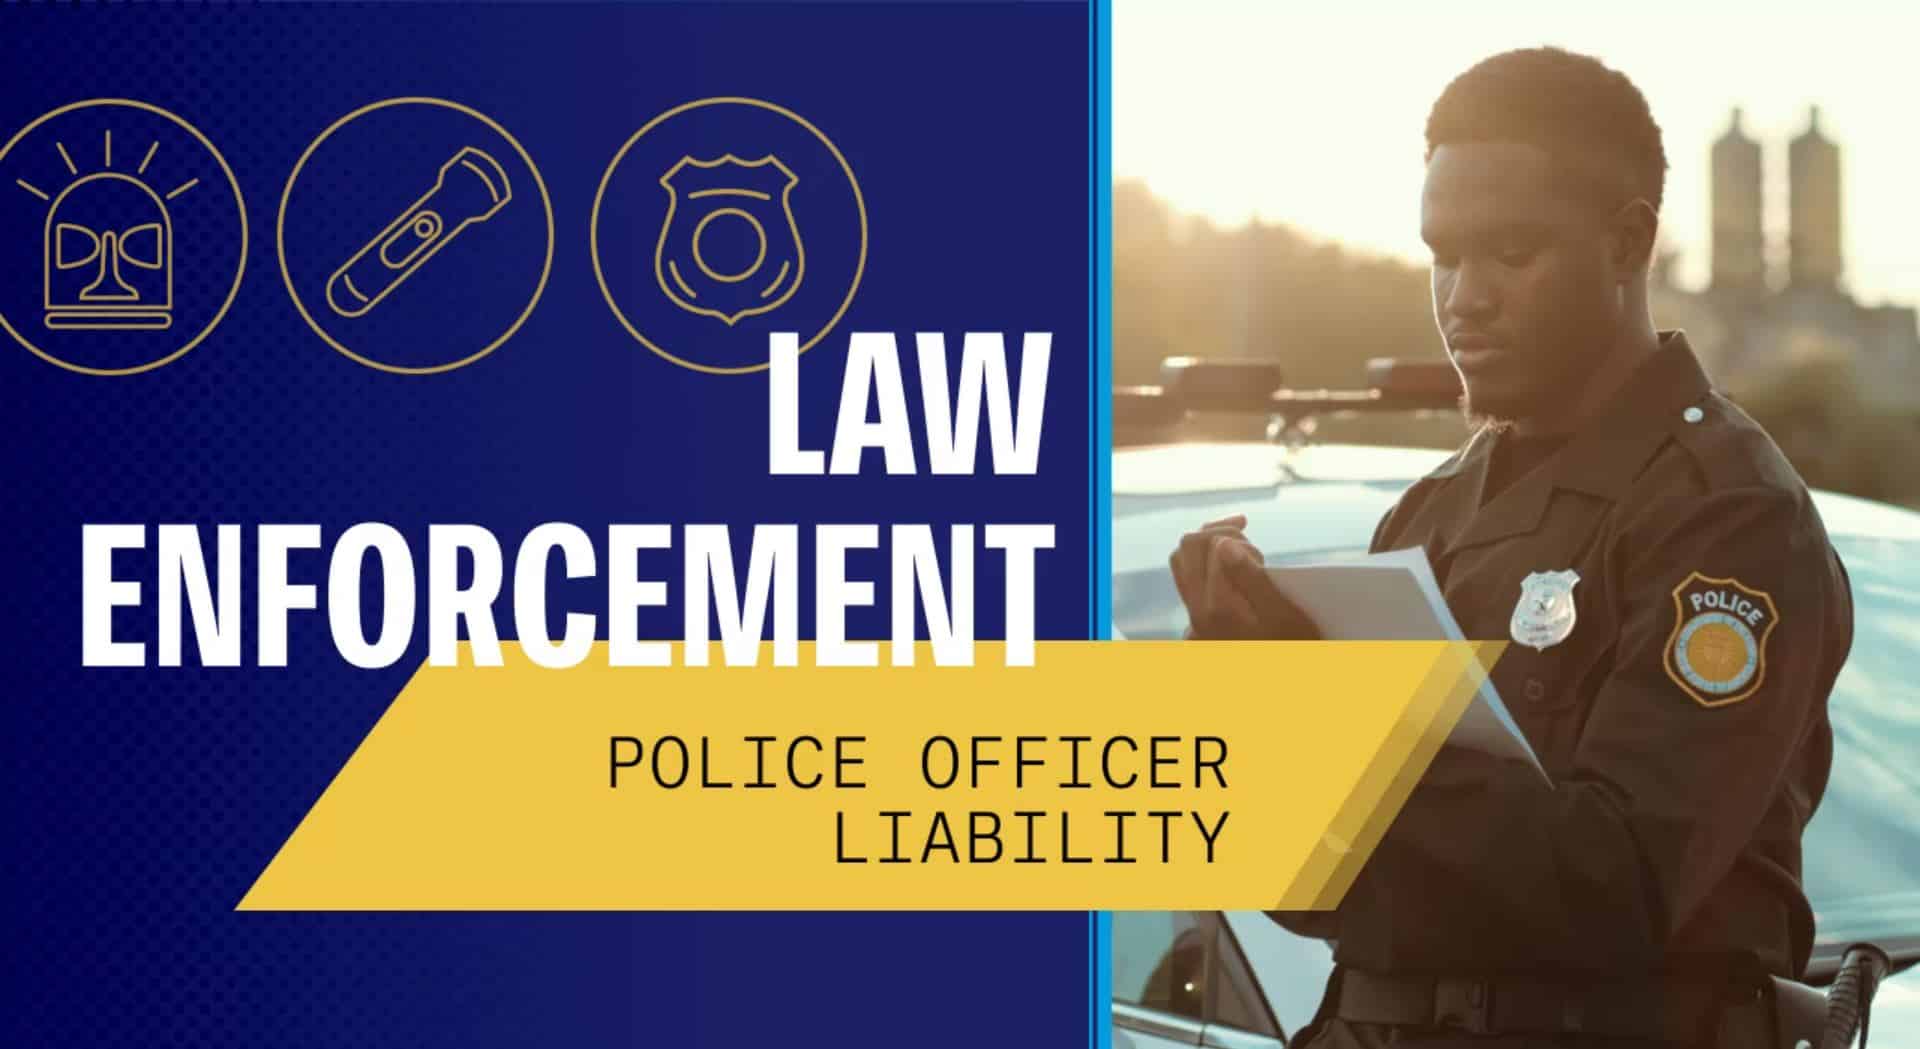 Police Officer Liability Course